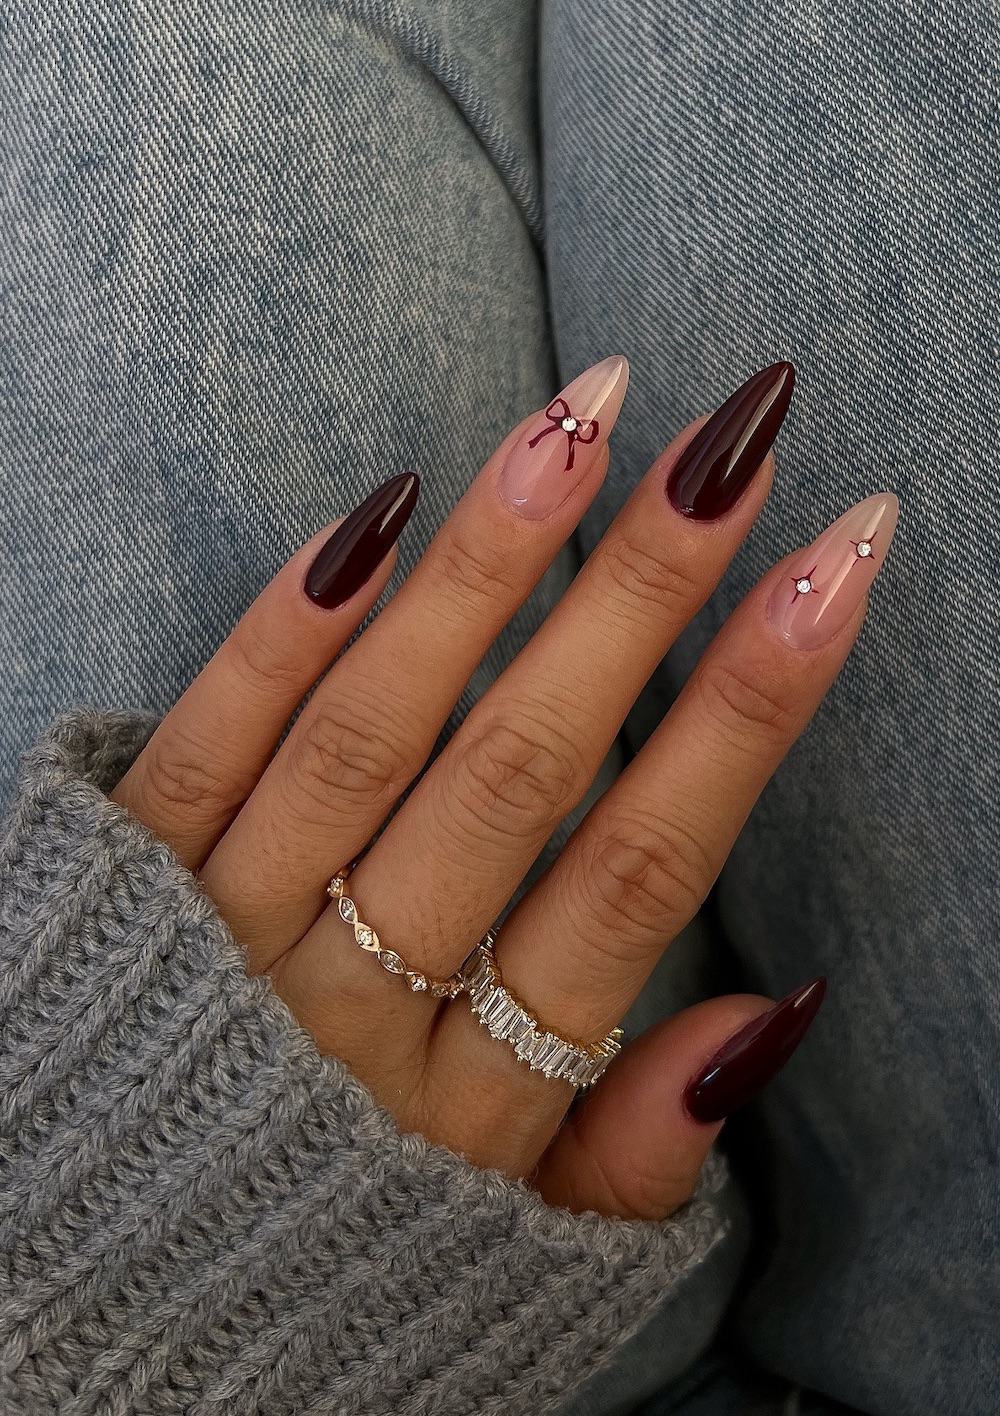 A hand with long almond nails painted a deep red with nude accent nails featuring sparkles, bows, and crystals